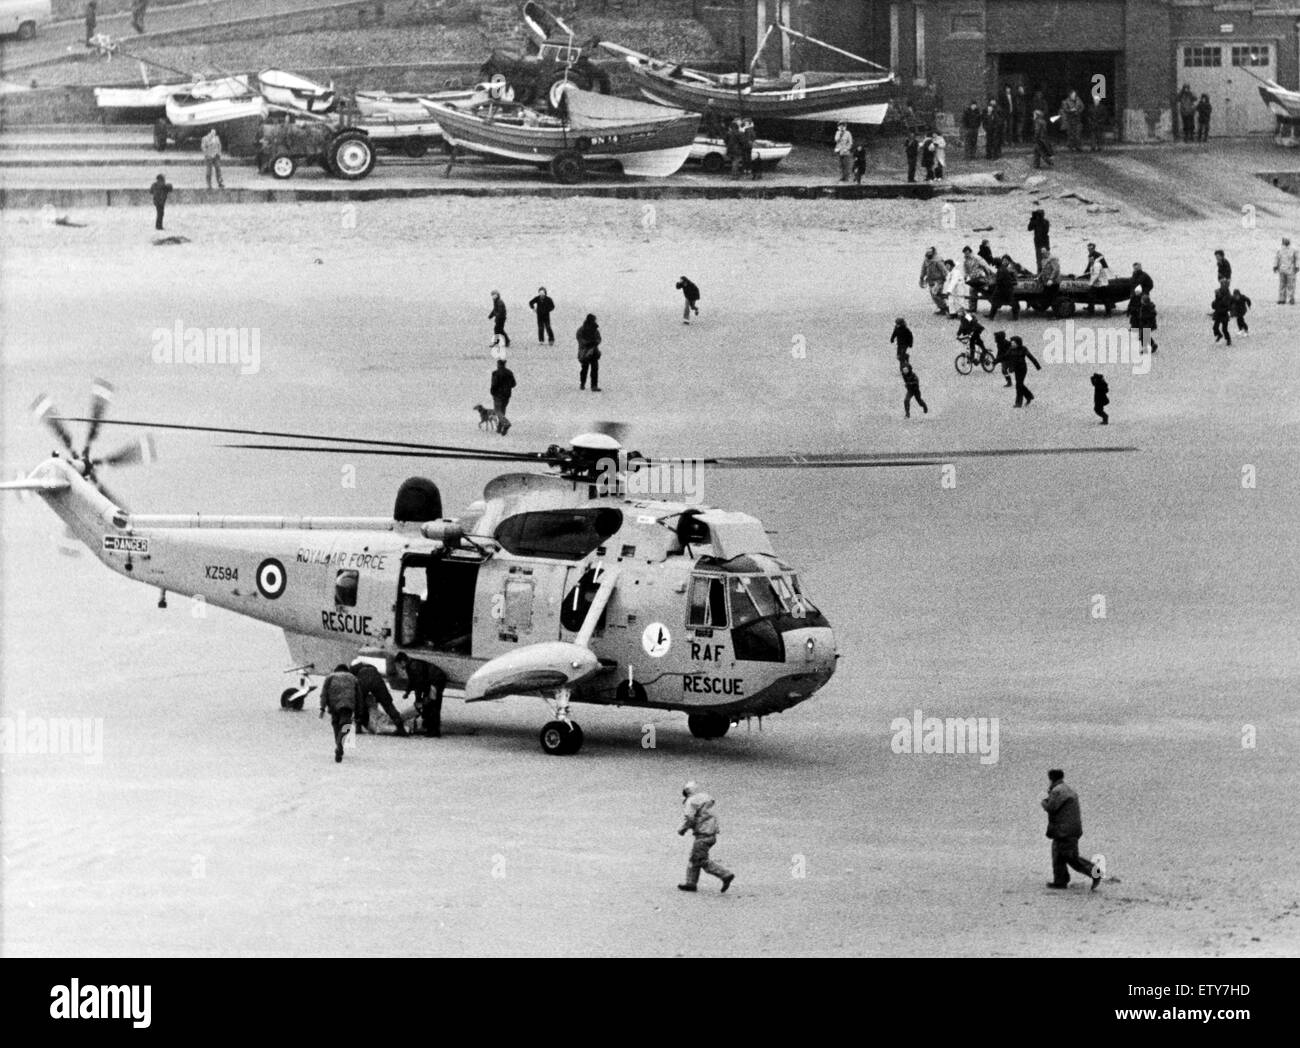 Sea rescue off Cullercoats Harbour in winds of up to Force 7. The double rescue of a fishing boat and then the inshore rescue boat. The Sea King rescue helicopter lands a man on the beach after he was plucked out of the sea. In the background the inshore Stock Photo